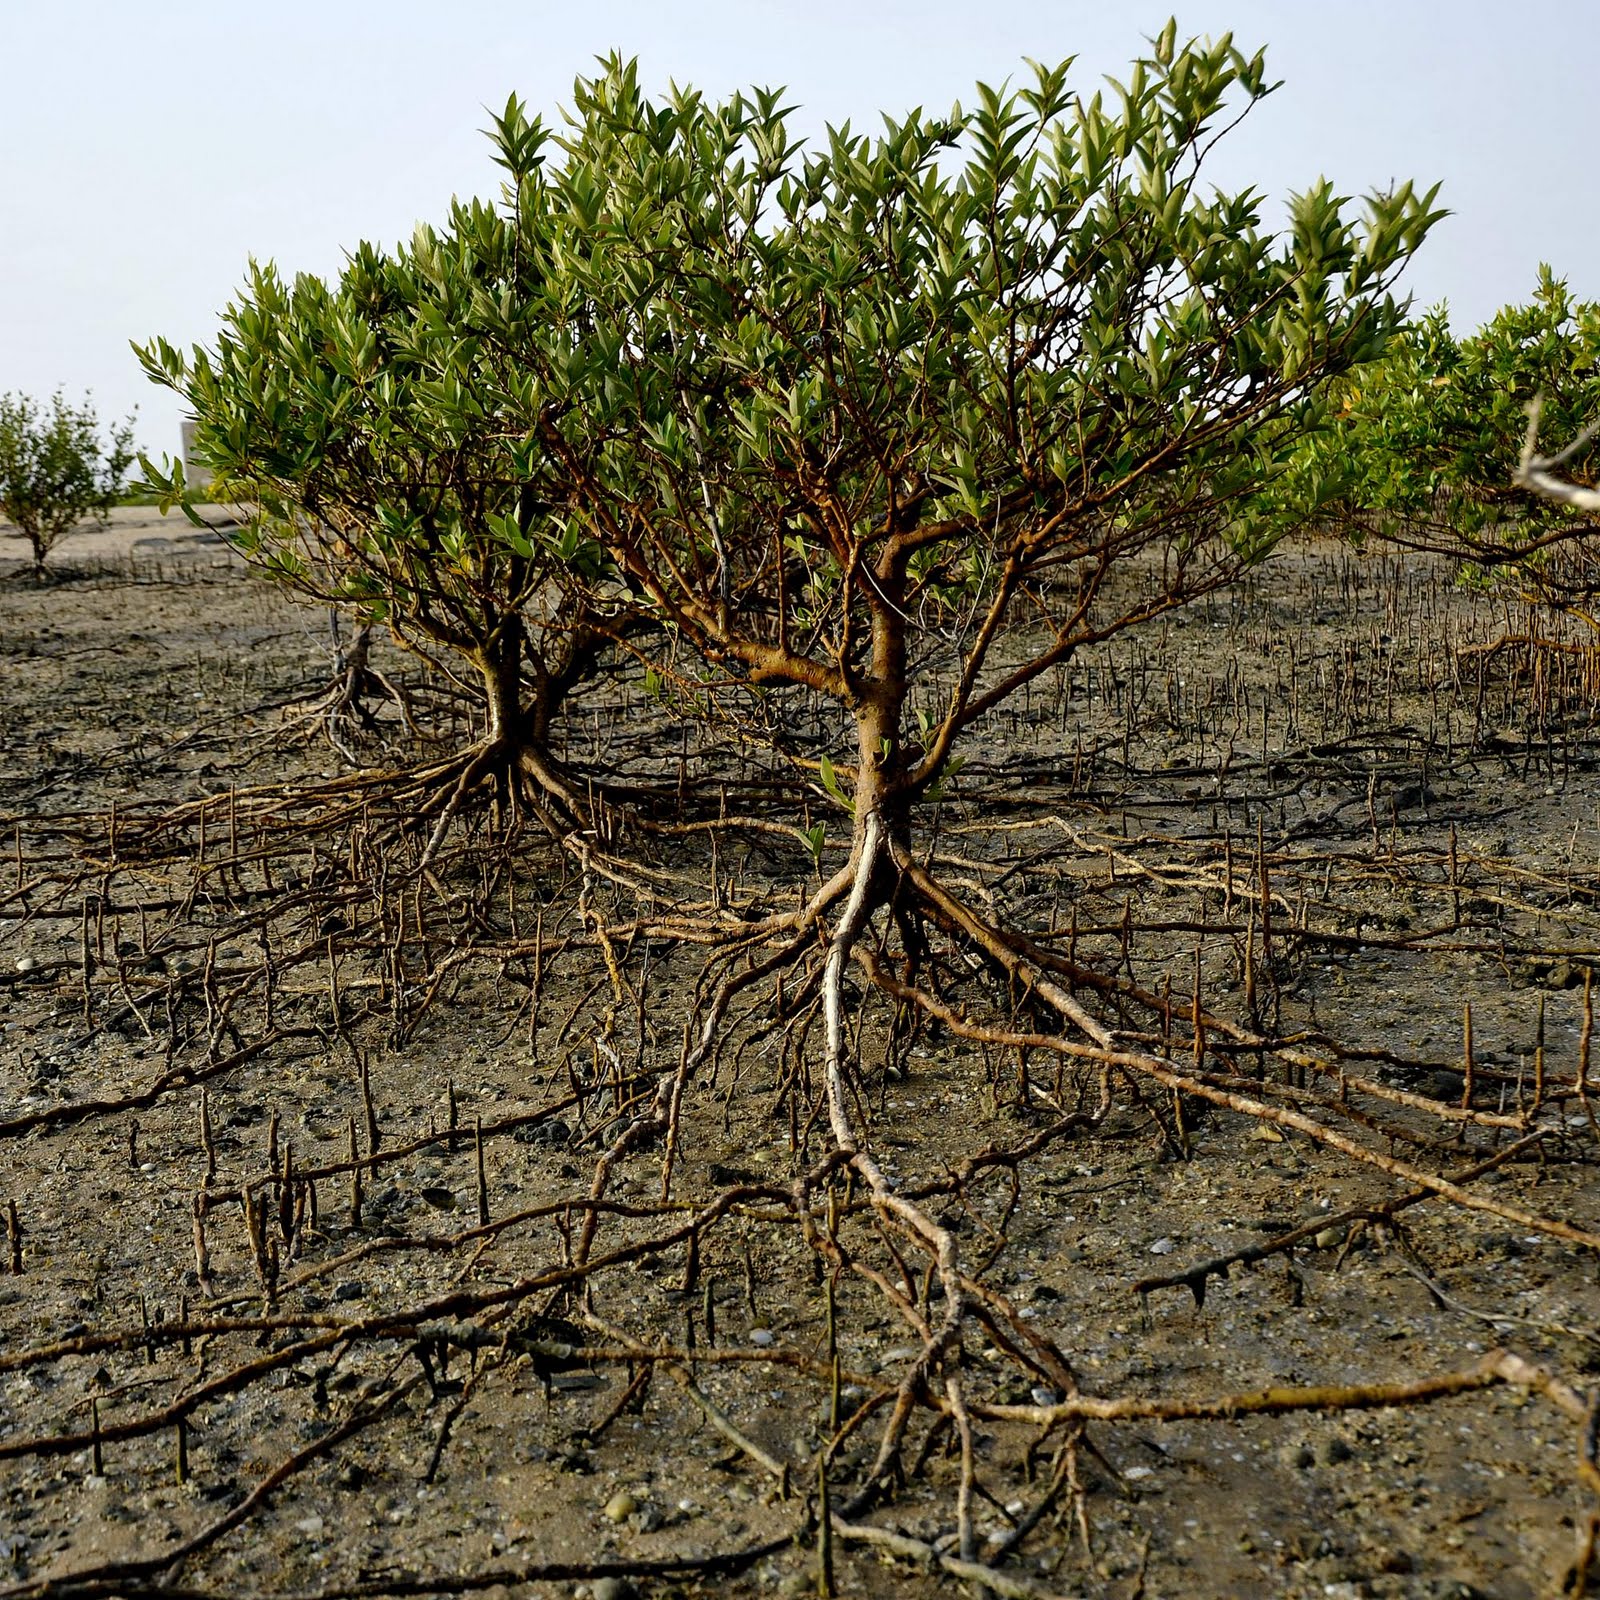 UAE looks to salty, muddy mangroves in climate change fight